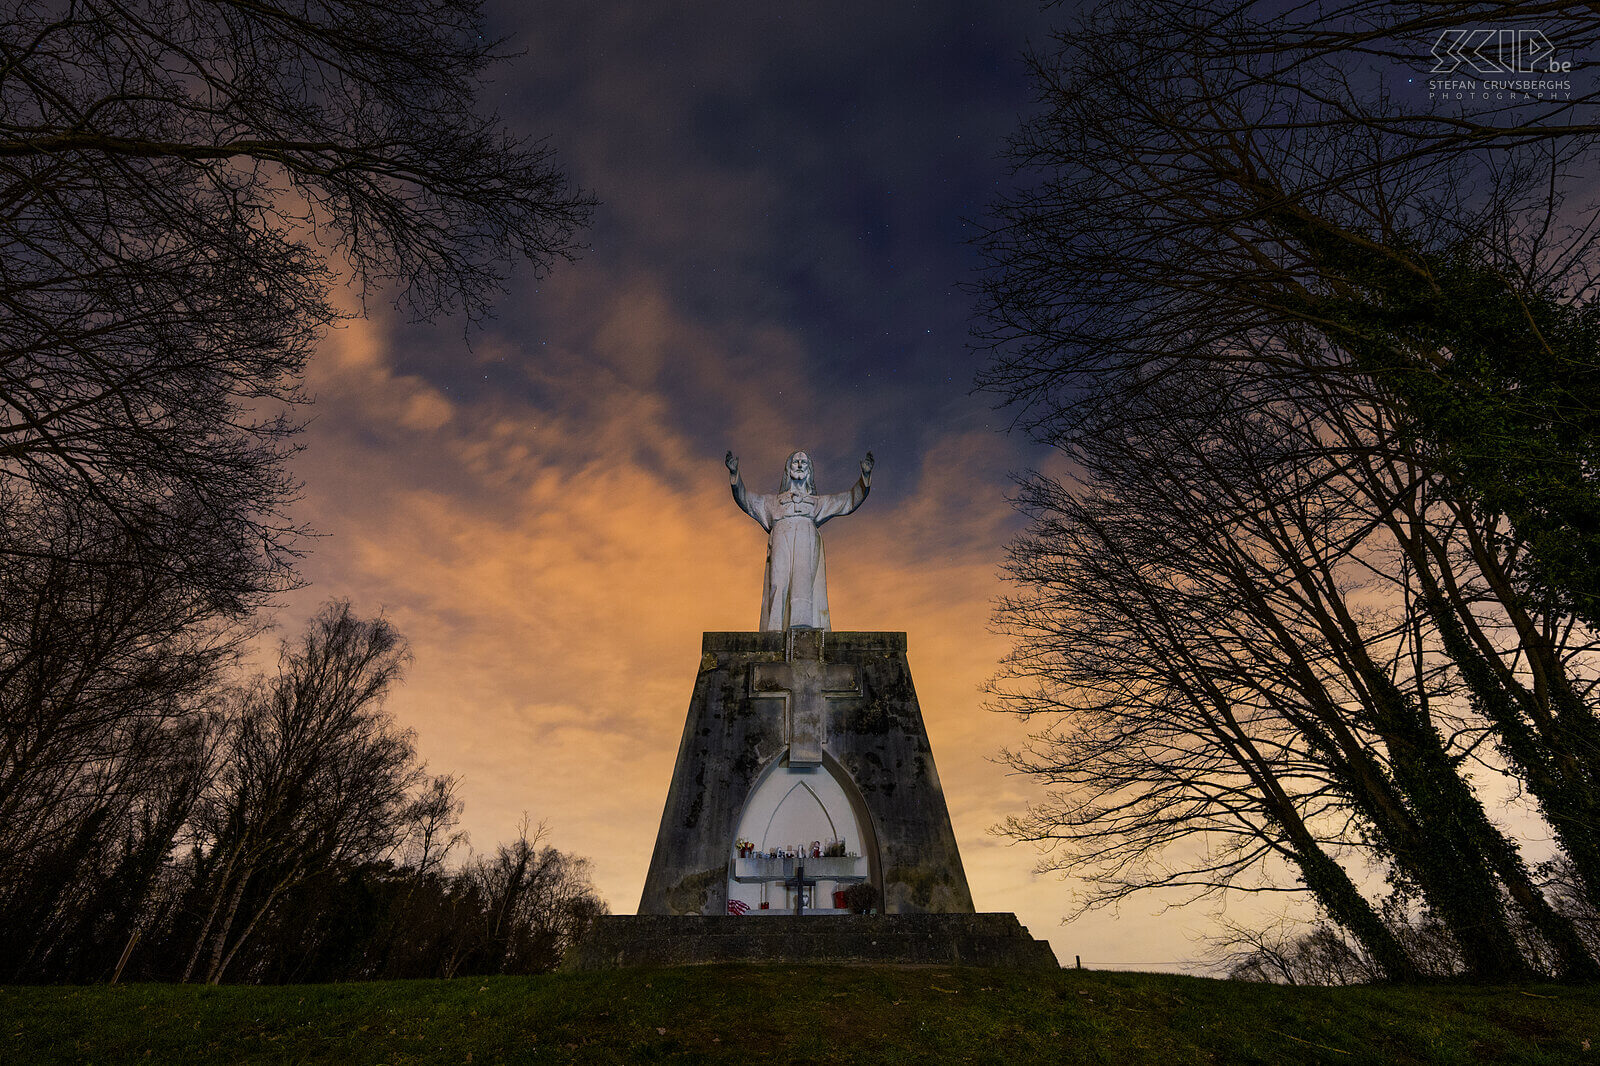 Hageland by night - Sacred Heart statue in Assent The Sacred Heart statue is a picture of Jesus Christ overlooking Assent, a sub-municipality of Diest. The statue stands on the ridge of the Prinsenbos in Bekkevoort. Stefan Cruysberghs